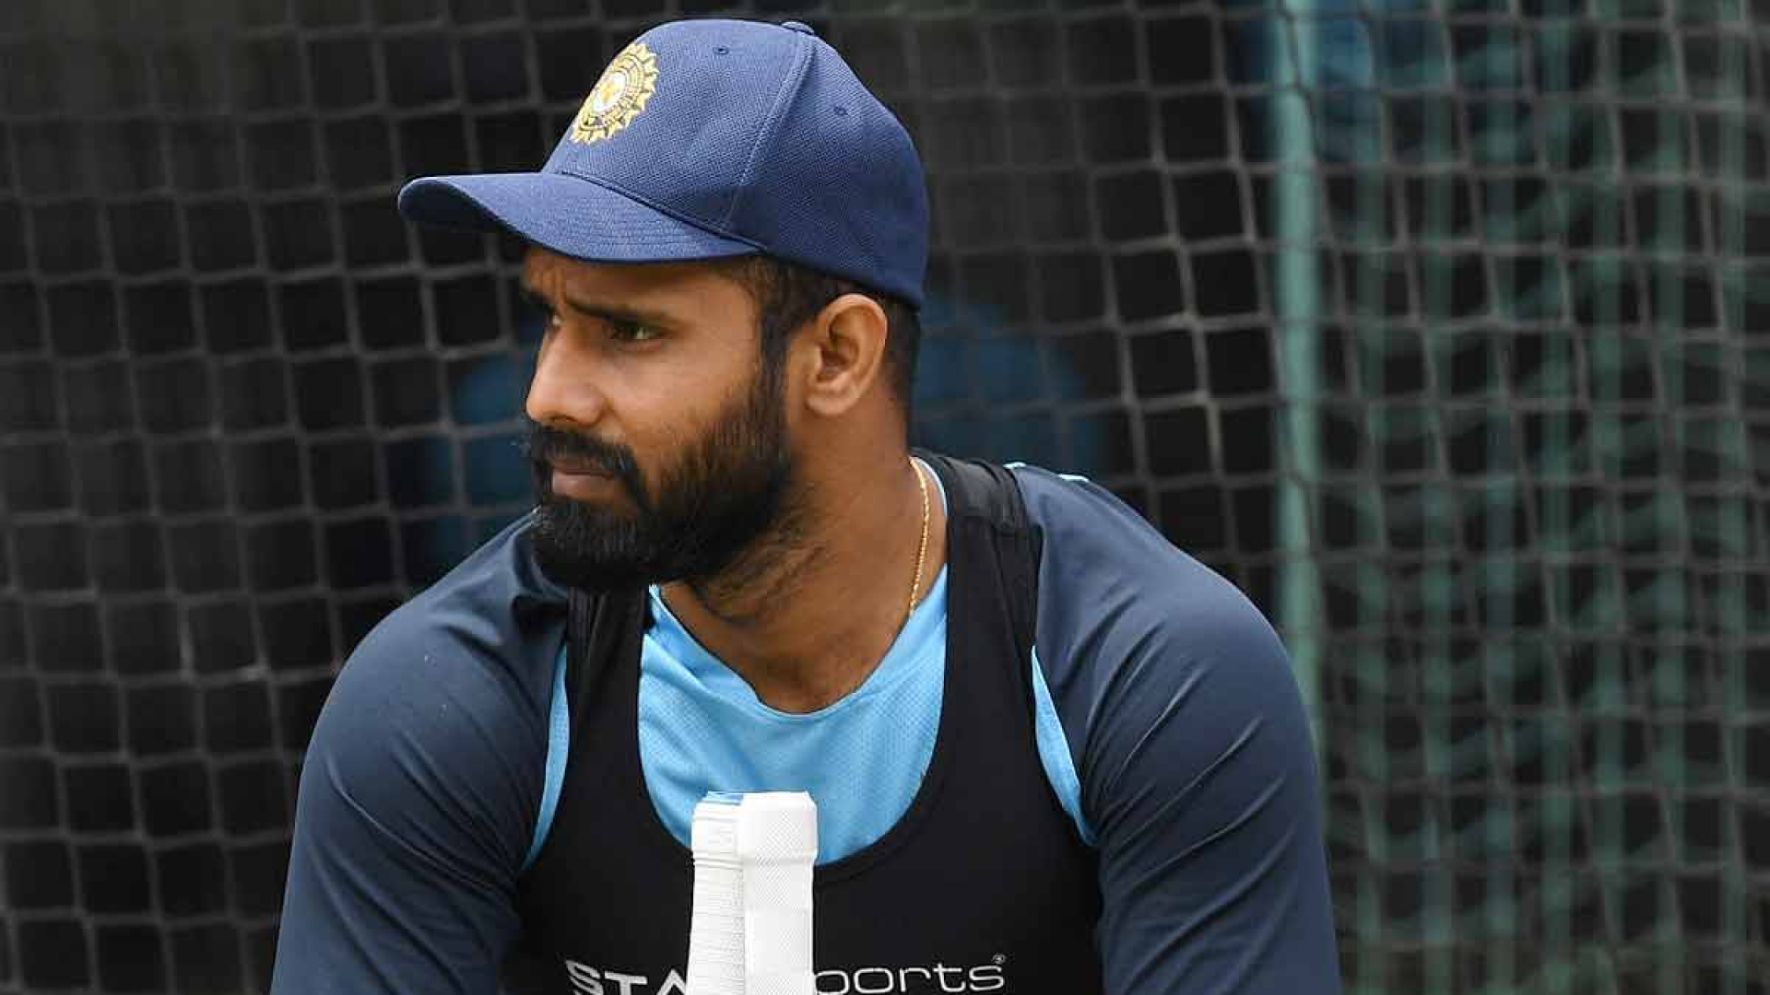 I don’t want glorification: Hanuma Vihari stays humble as praises pour in for his Covid relief work